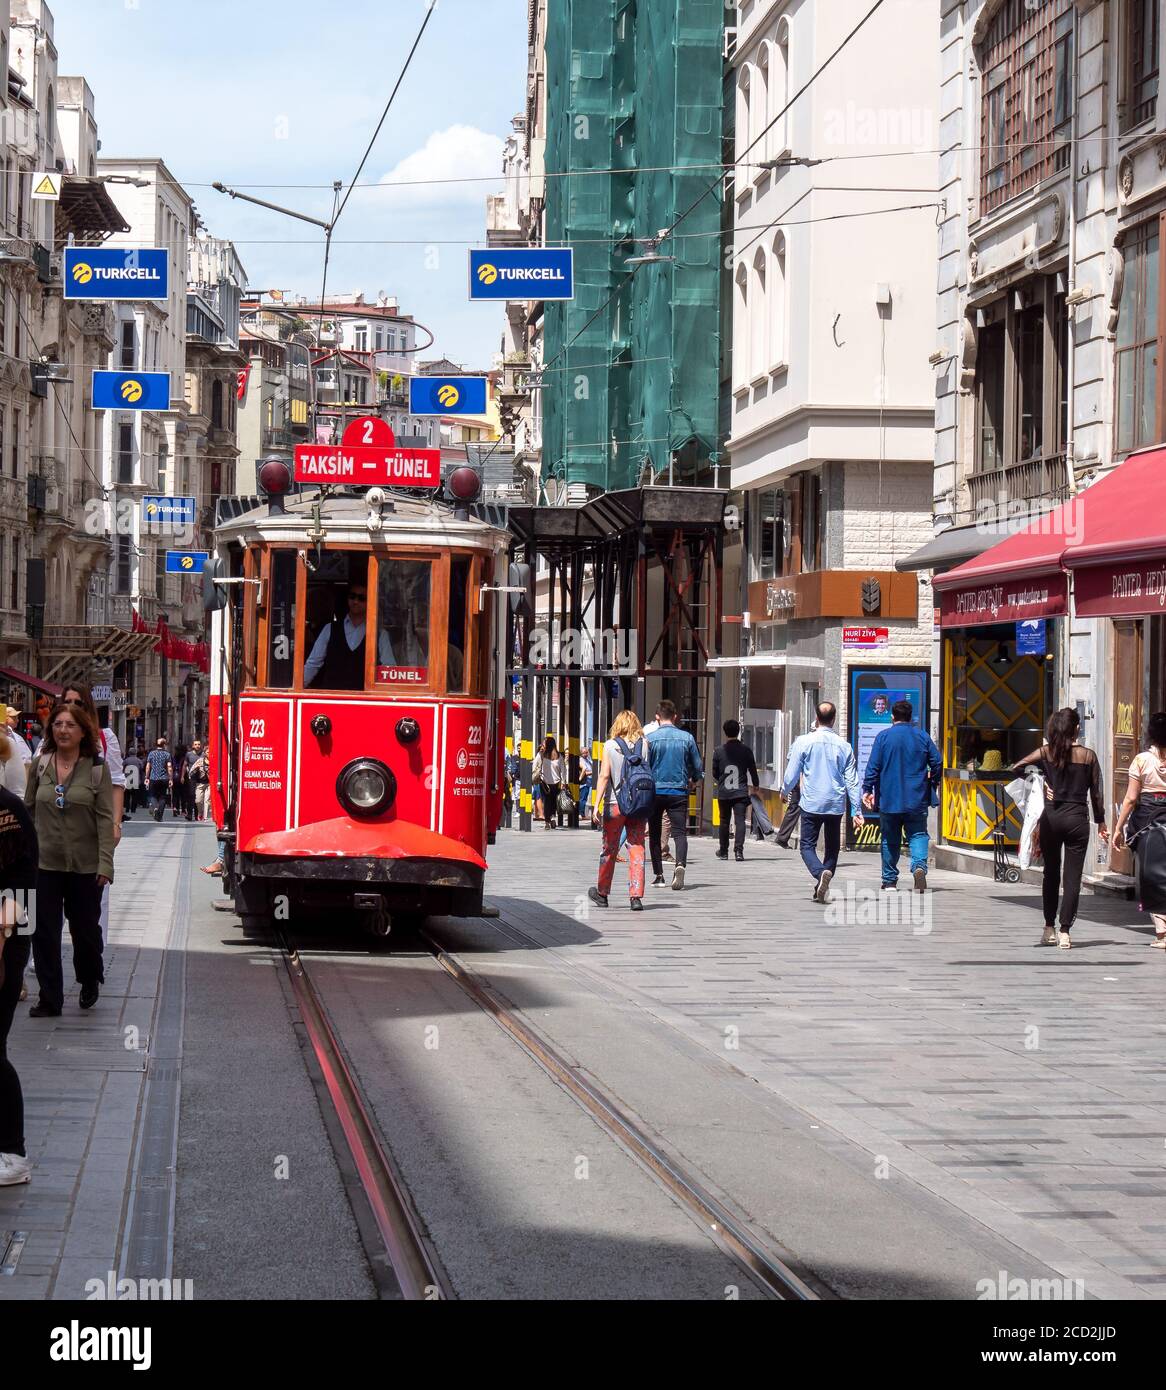 ISTANBUL, TURKEY - MAY, 22, 2019: front view of the taksim-tunel tram in istanbul Stock Photo